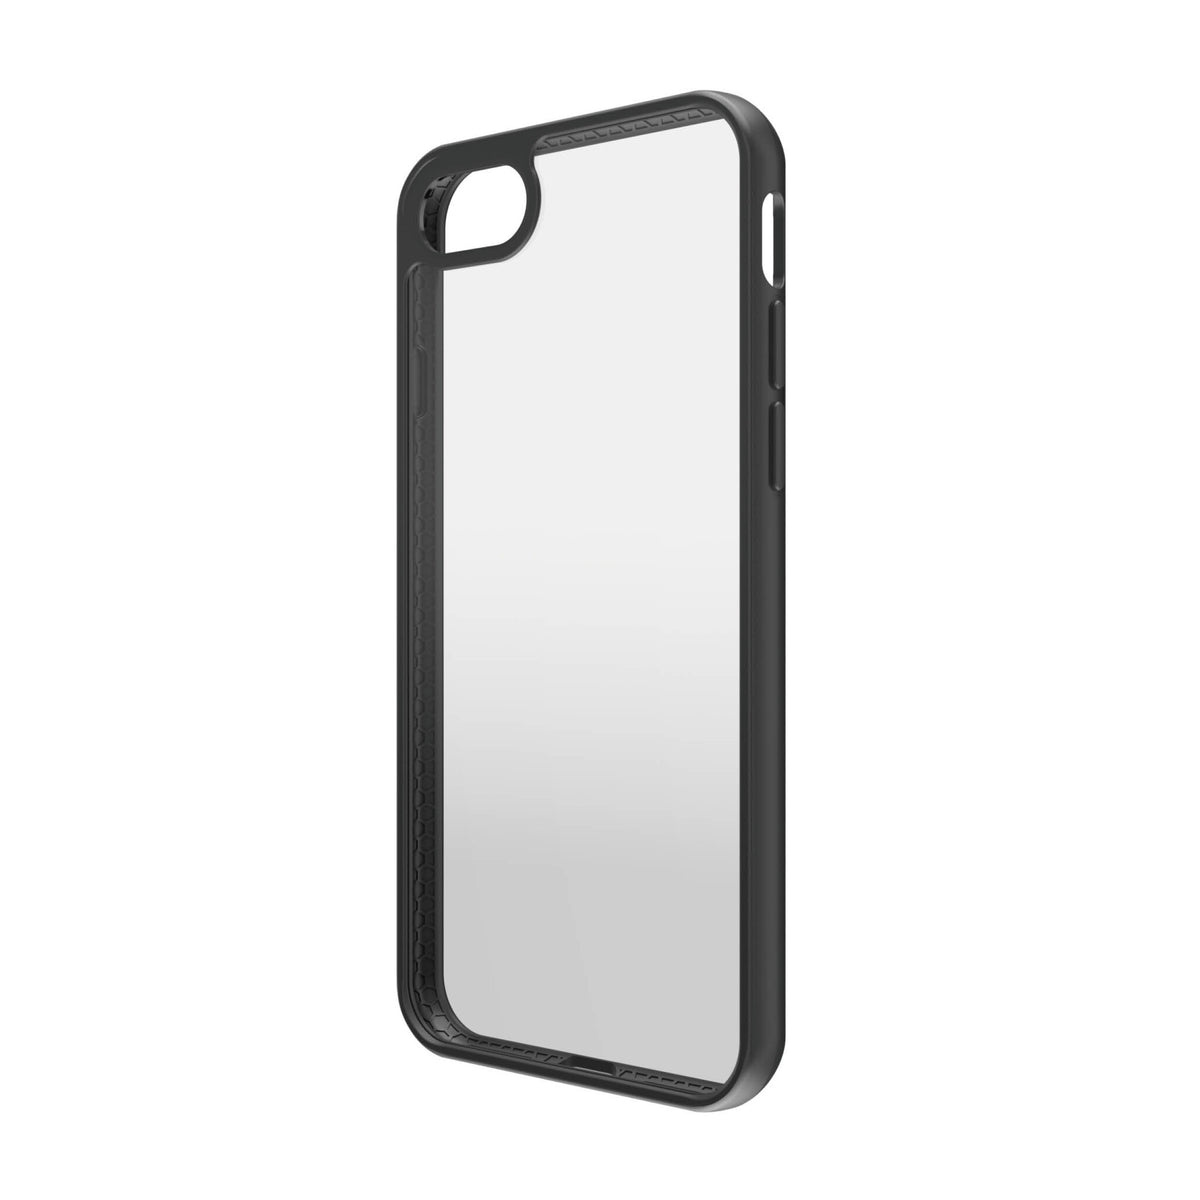 PanzerGlass ® ClearCase for iPhone 8 / 7 / SE (2020/2022) in Black